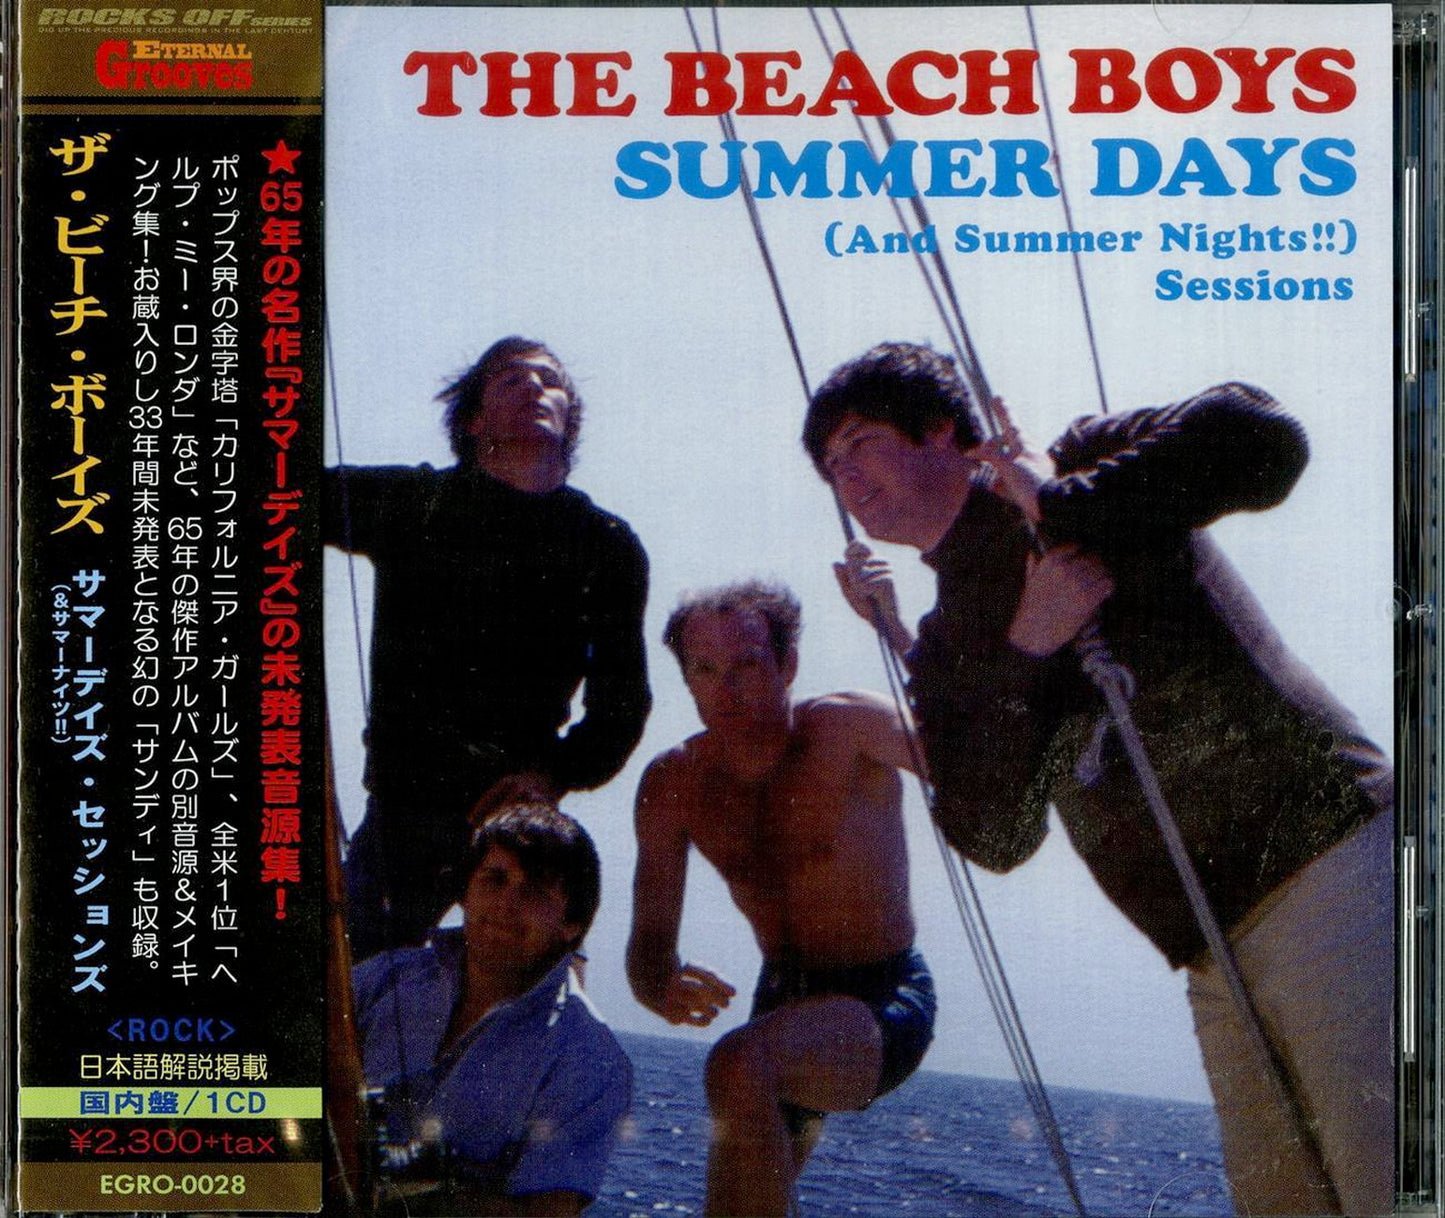 The Beach Boys - Summer Days (And Summer Nights!!) Sessions - Japan CD